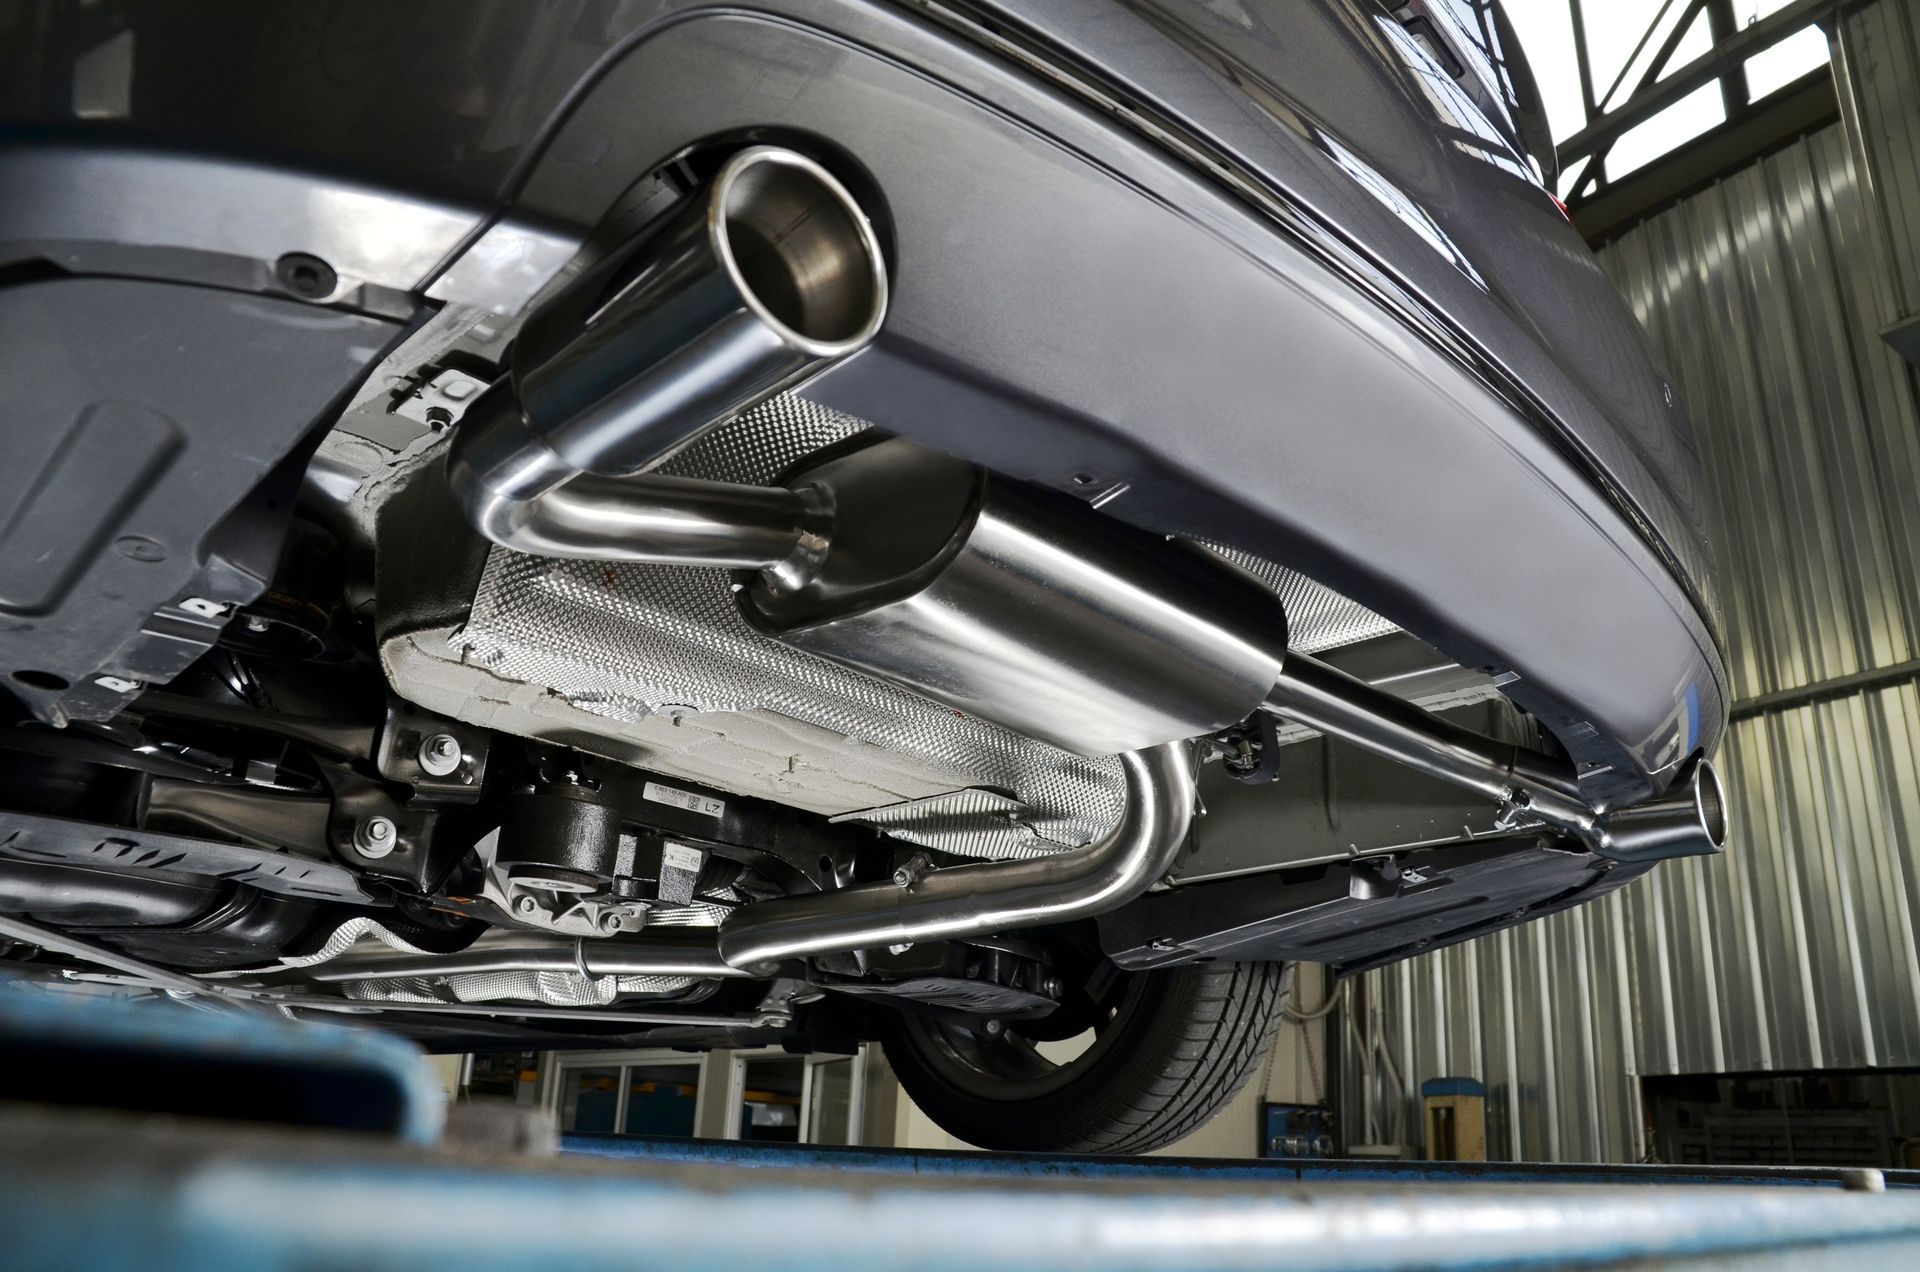 Exhaust Service at ﻿808 Automotive Inc.﻿ in ﻿Hubbard, OR﻿